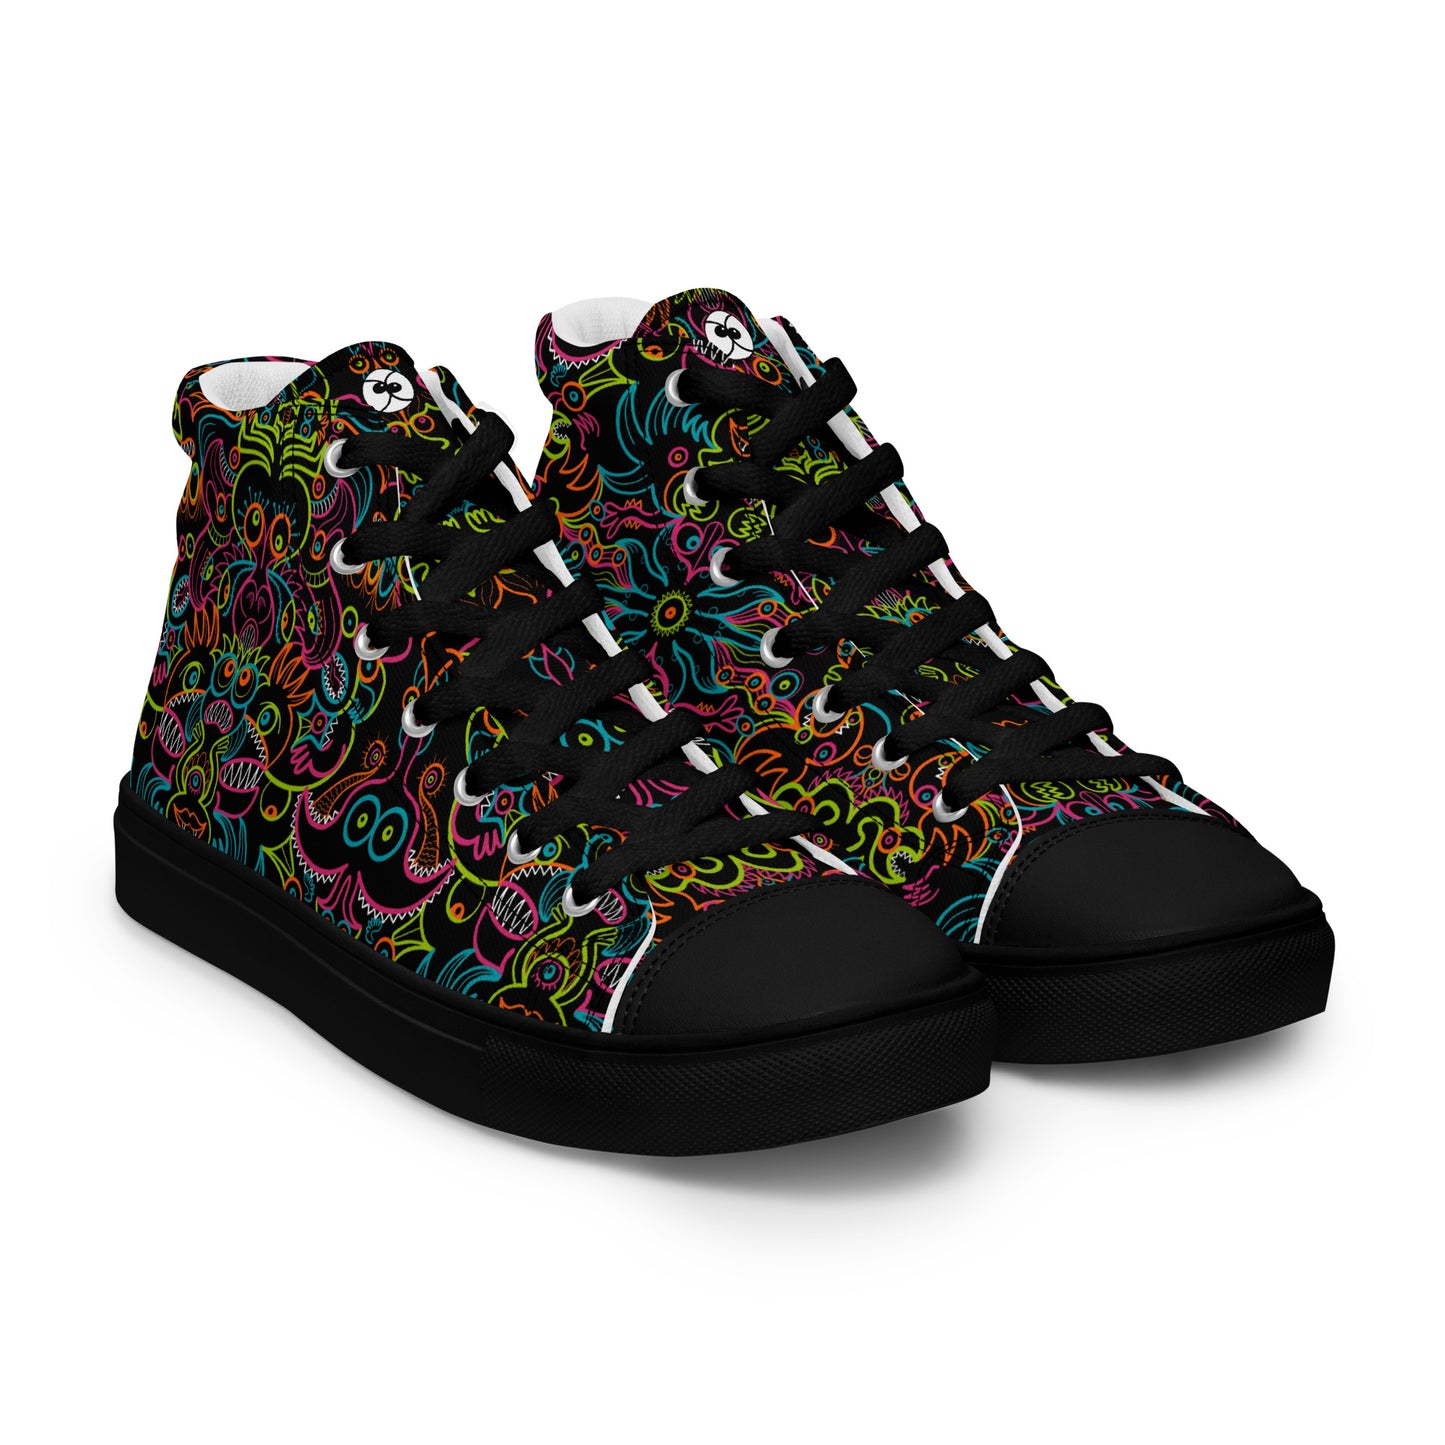 Doodle Carnival: A Kaleidoscope of Whimsical Wonders! - Women’s high top canvas shoes. Black color. Overview